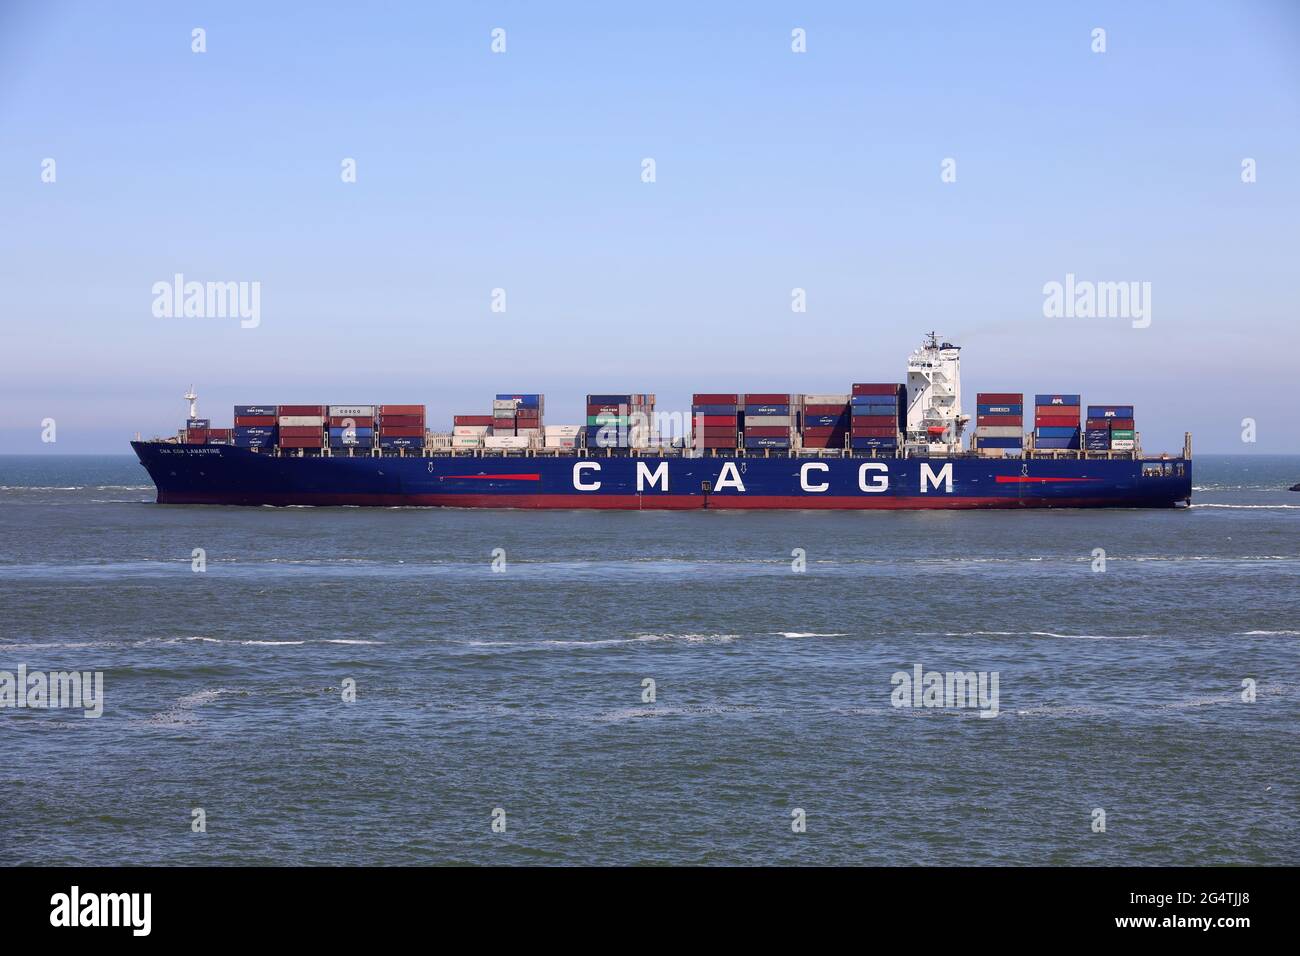 The container ship CMA CGM Lamartine will leave the port of Rotterdam on May 29, 2021. Stock Photo